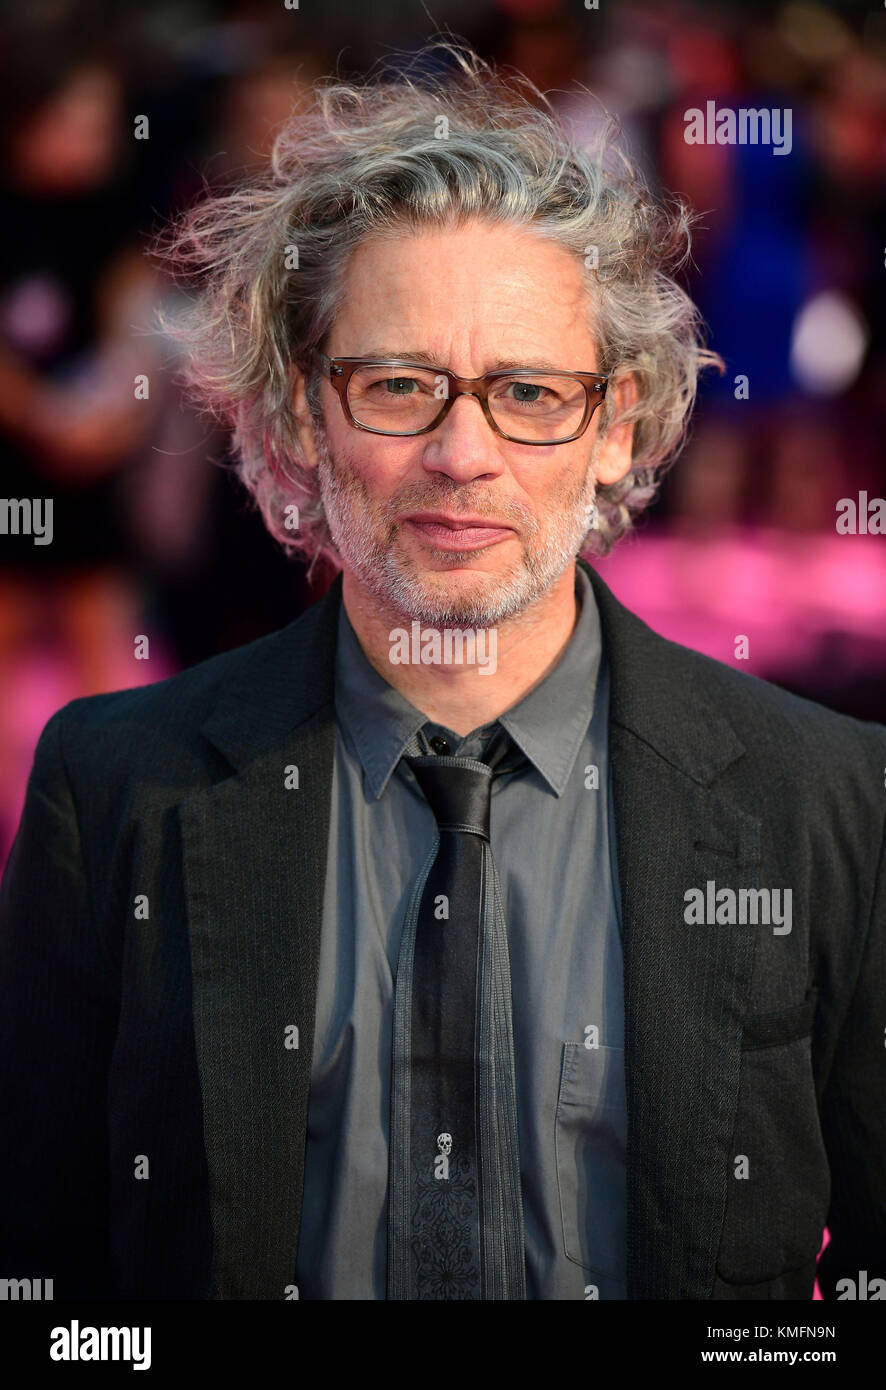 File photo dated 5/9/2016 of Dexter Fletcher who will replace Bryan Singer as director of Queen biopic Bohemian Rhapsody . Stock Photo